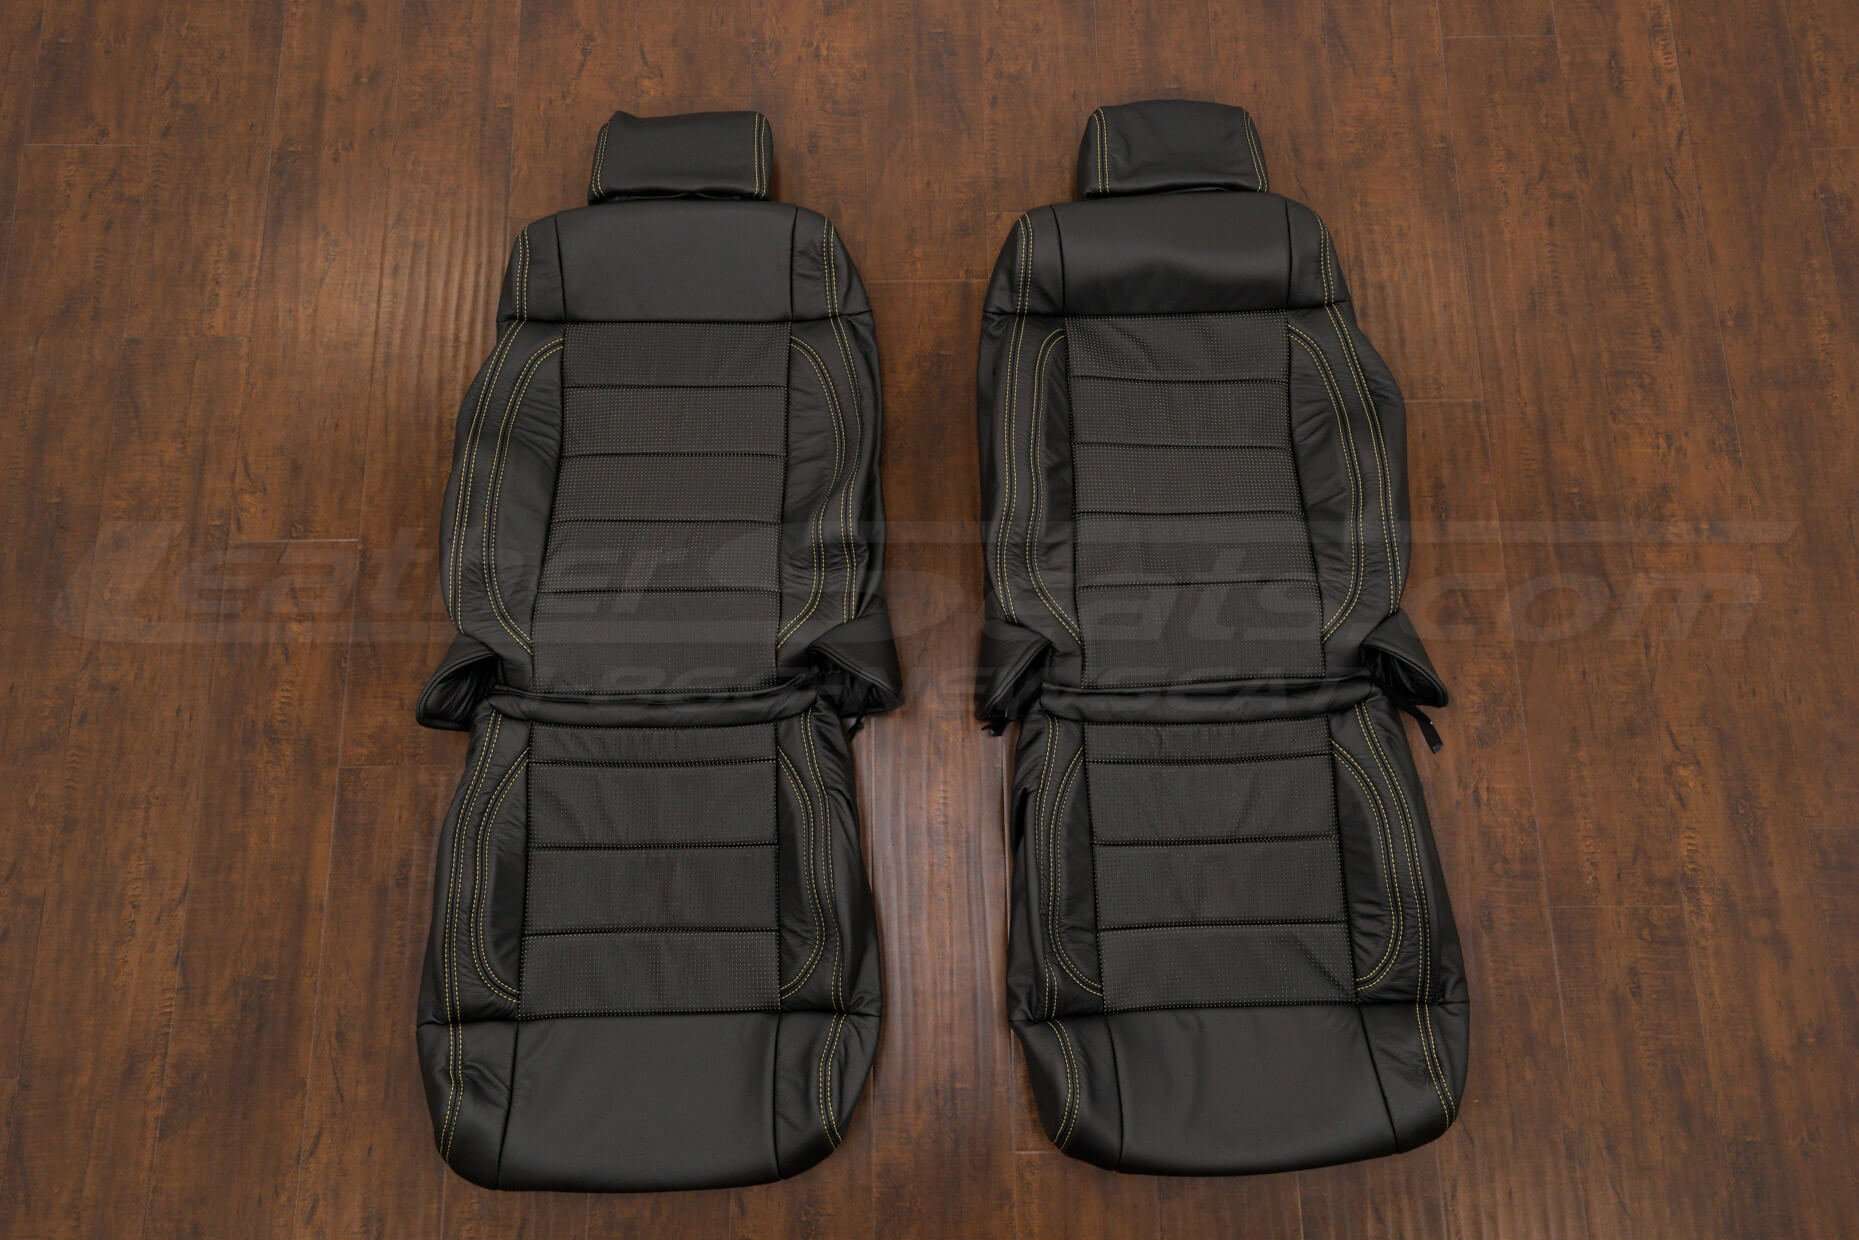 Jeep Wrangler JK Leather Seat Kit - Black & Piazza Yellow - Front seat upholstery